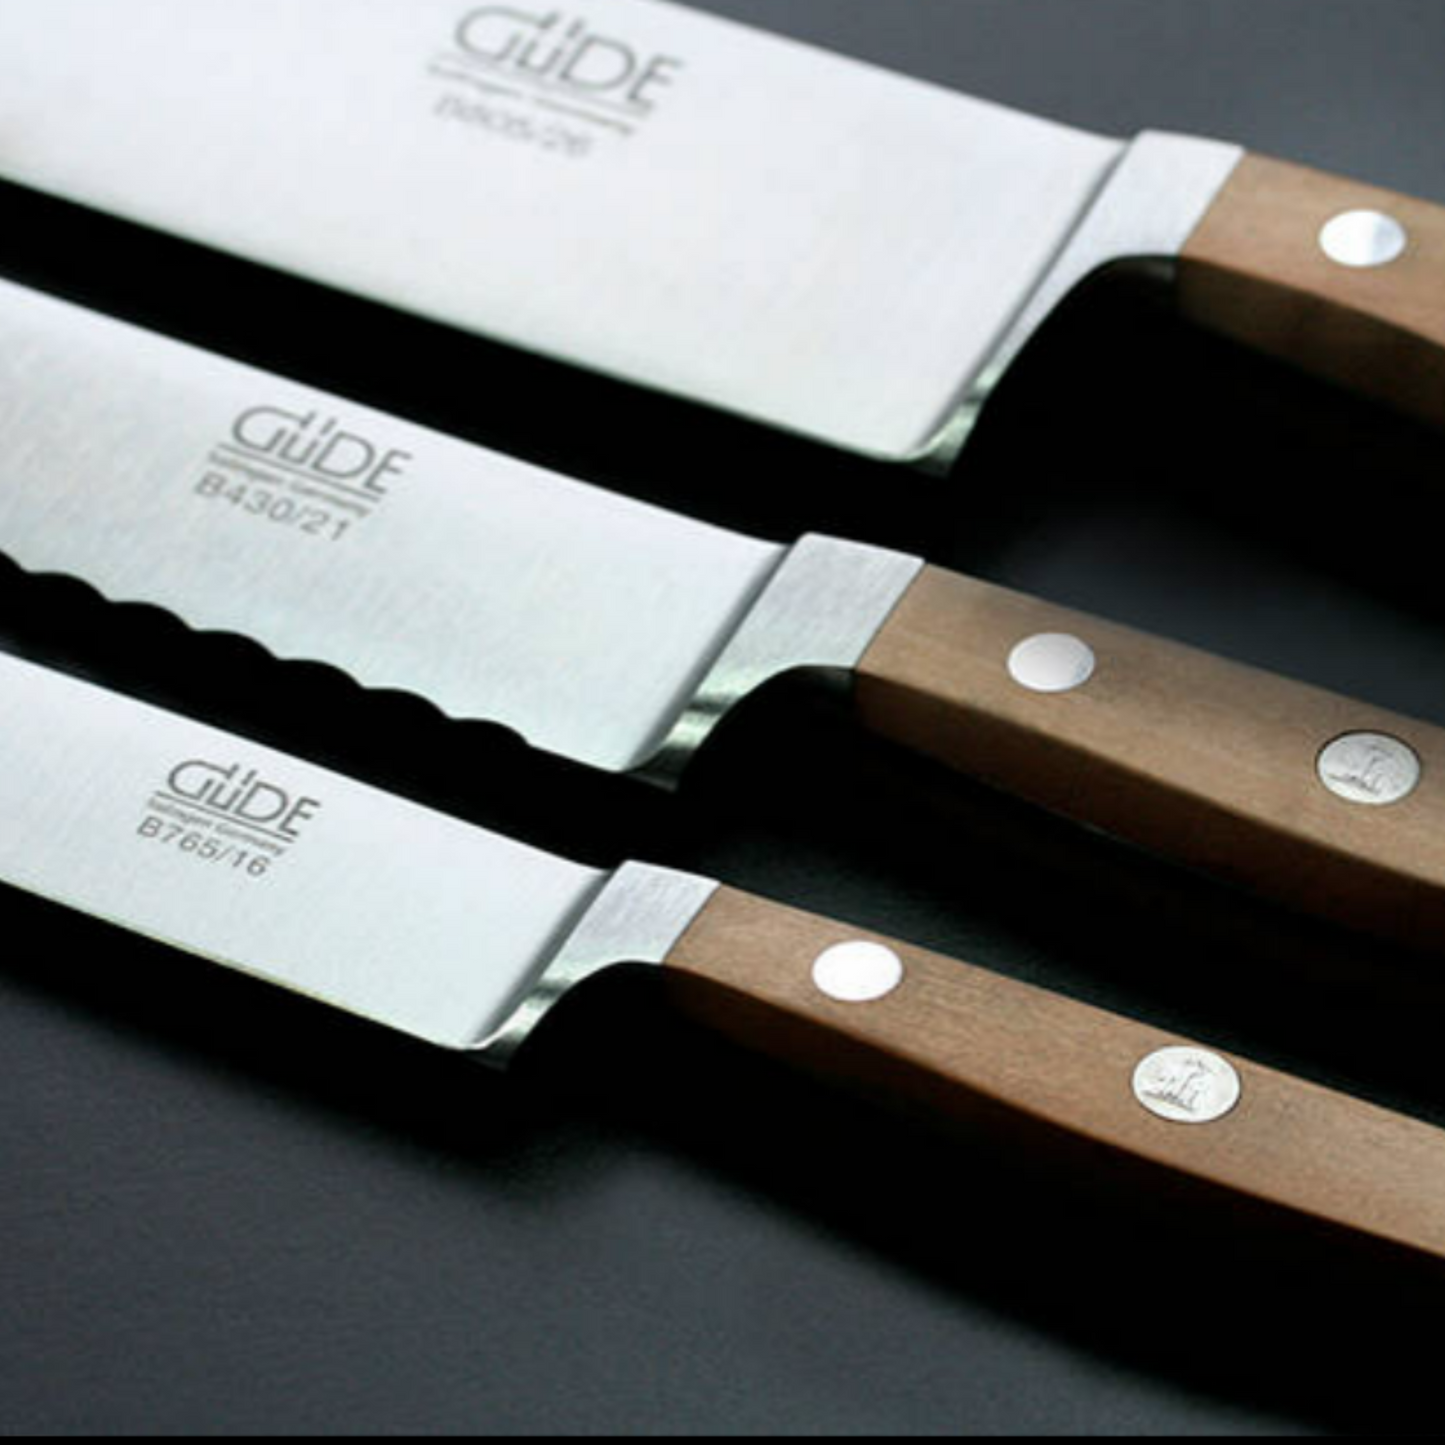 Gude Alpha Birne Series Forged Double Bolster Chef's Knife 10", Pearwood Handle - GuedeUSA